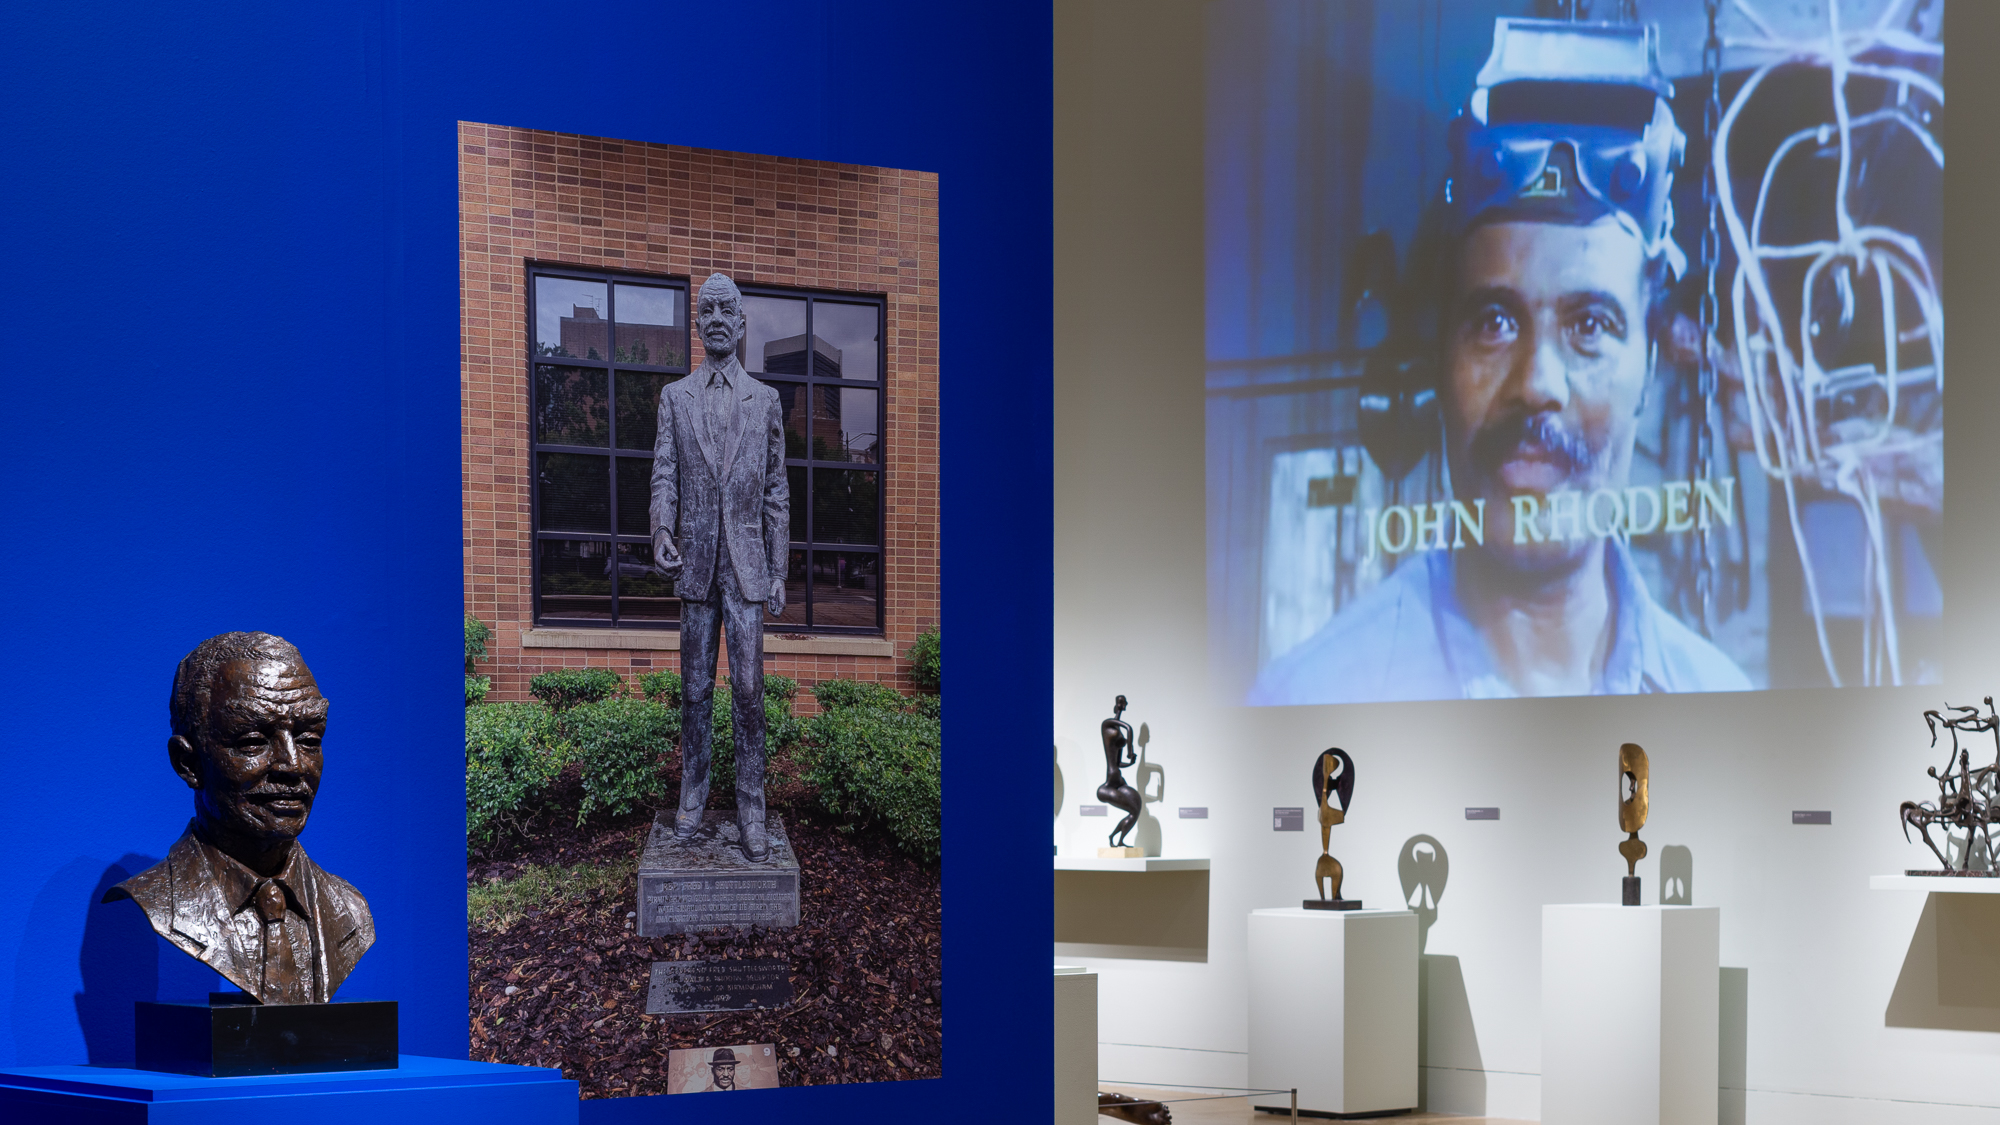 Installation view of the bust of Fred Shuttlesworth with an image of the full sculpture in the background, and to the right are more sculptures on view.